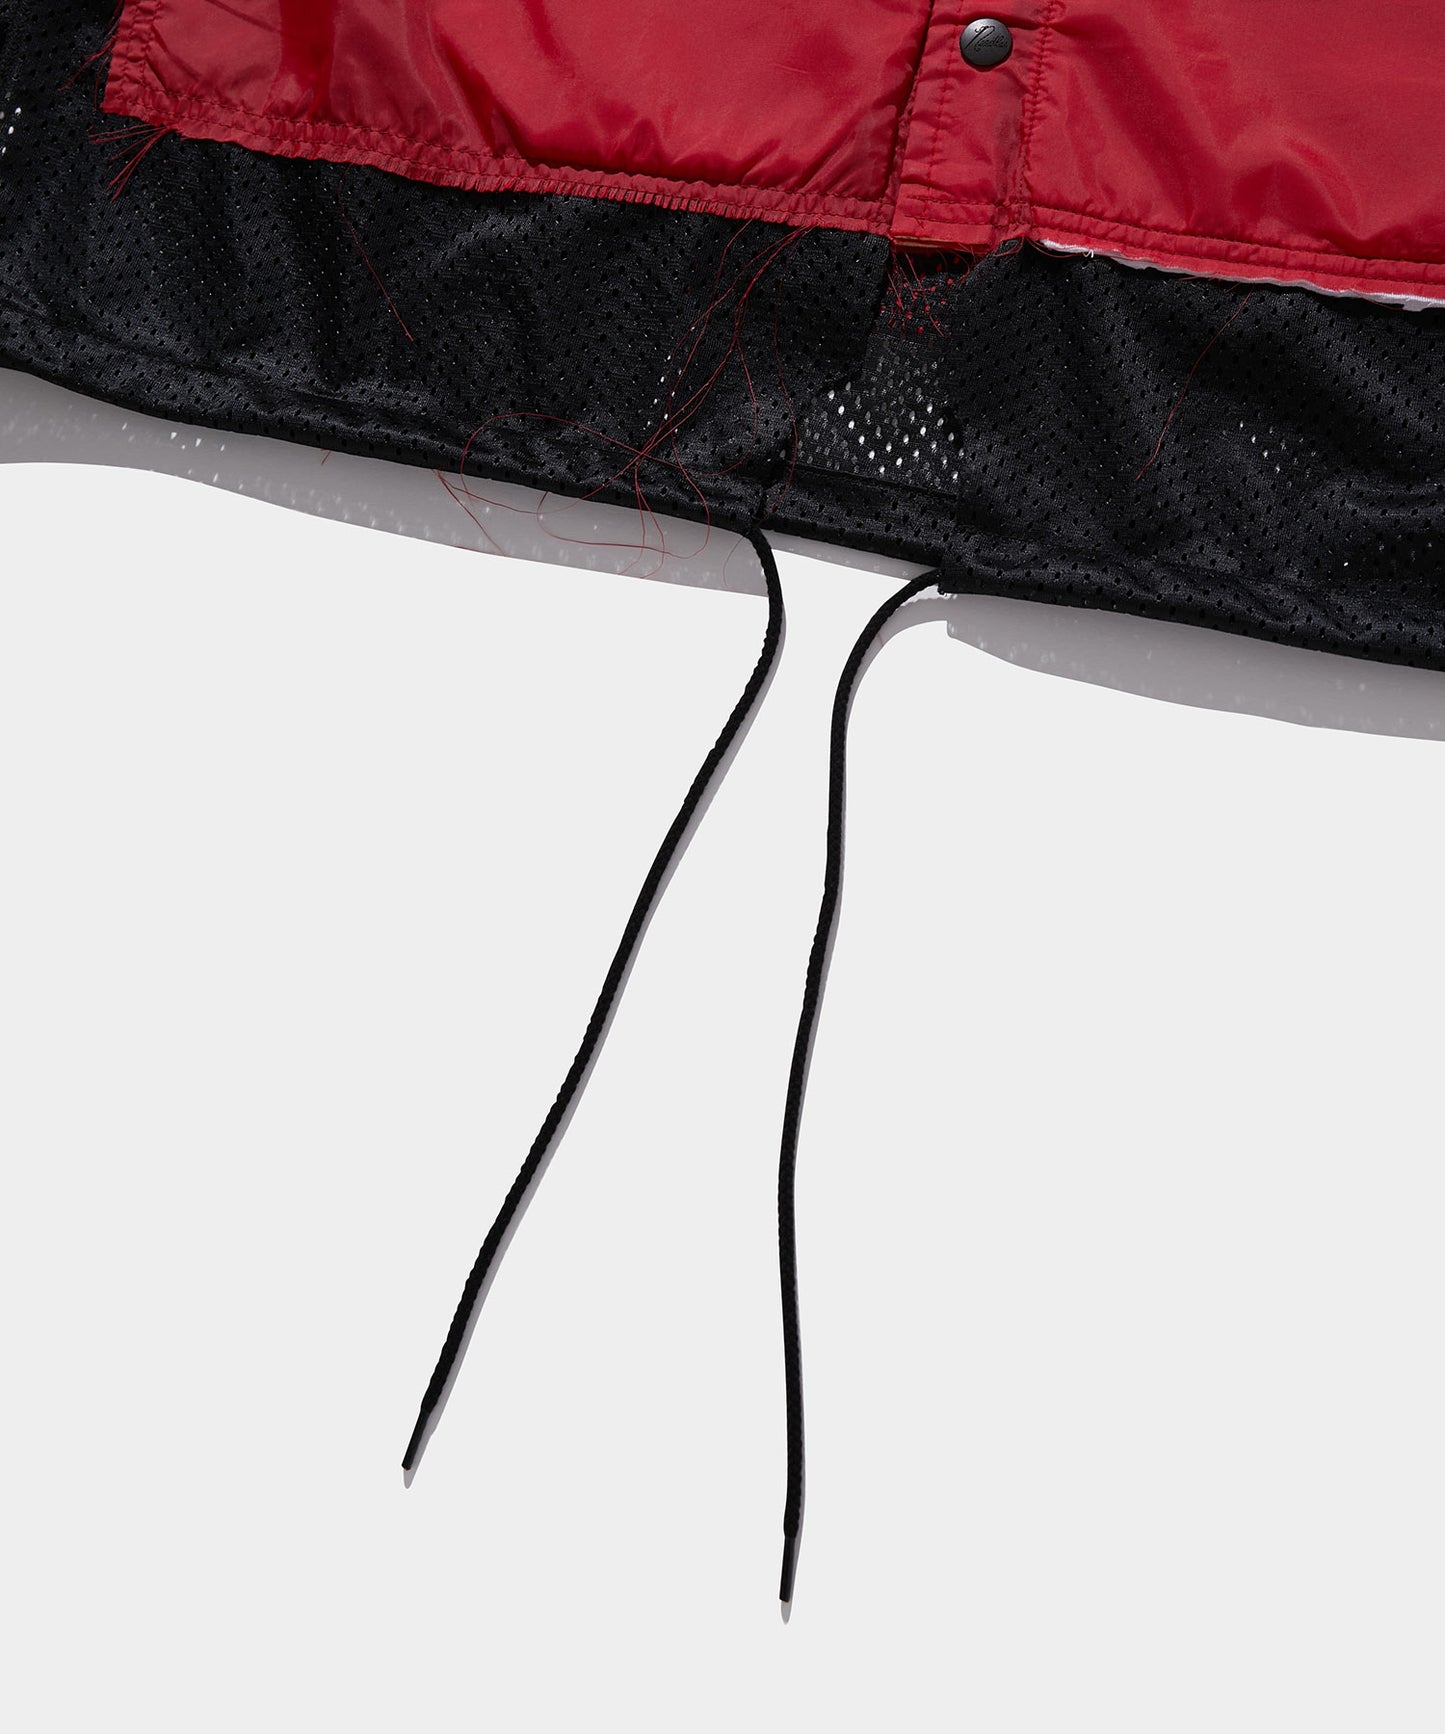 Rebuild by NEEDLES Coach Jacket -> Covered Jacket RED